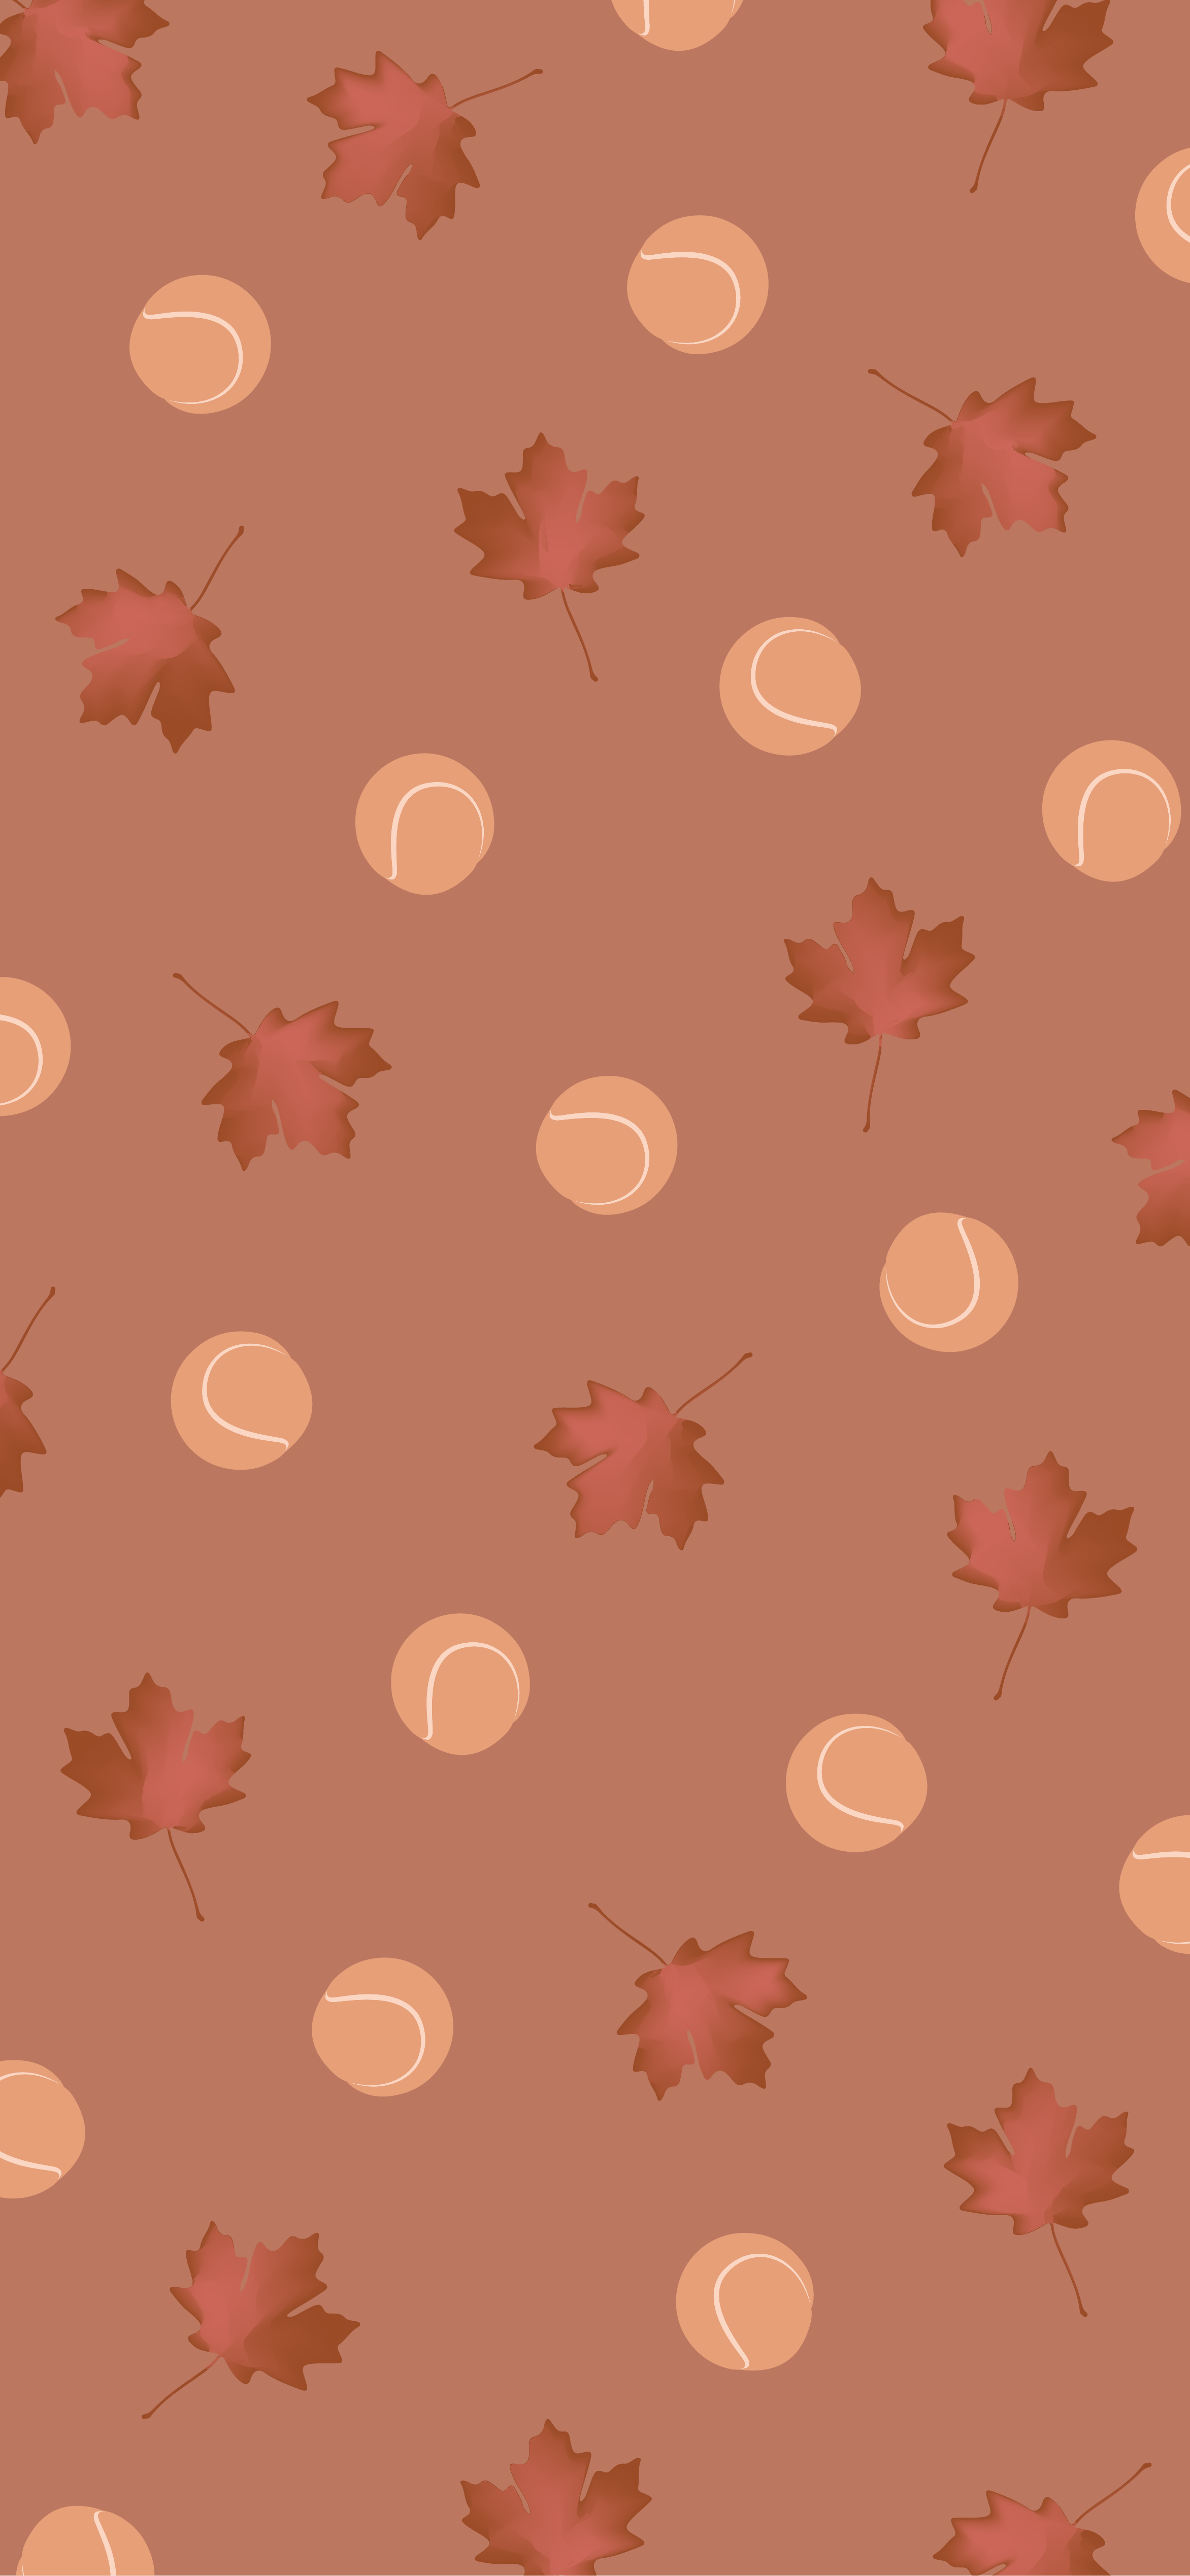 The Best Fall Phone Wallpaper for Tennis Players